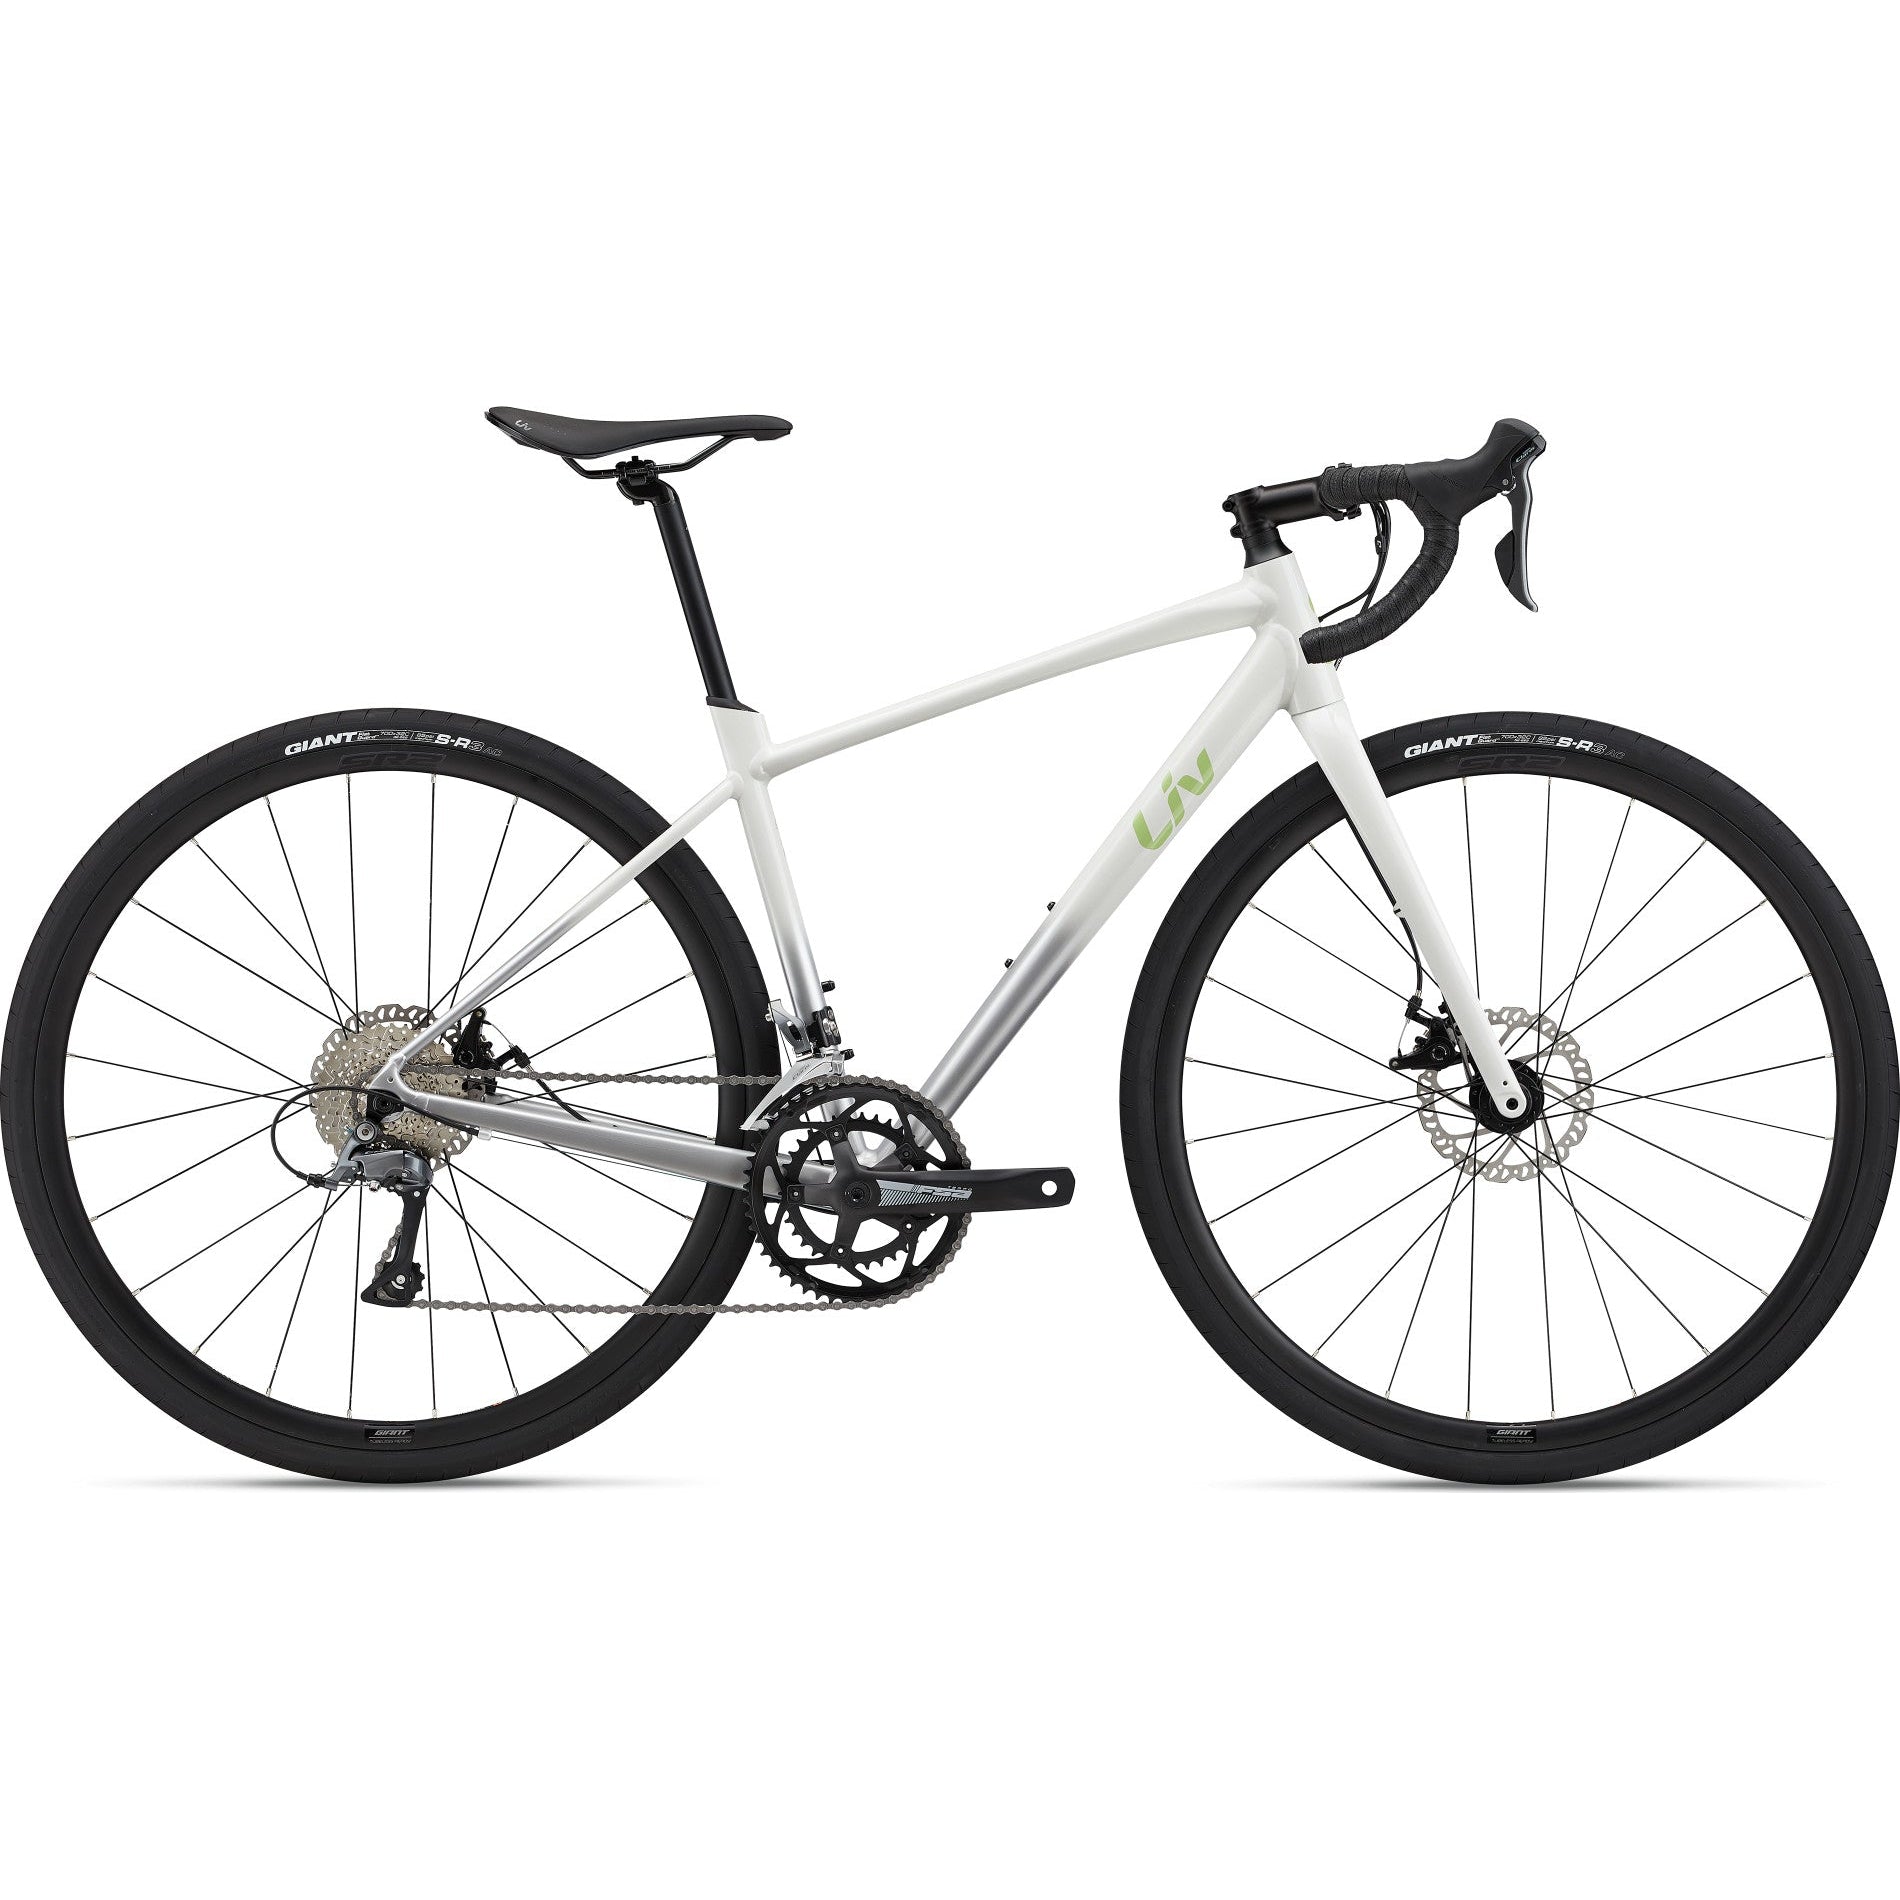 Bicycle Warehouse RB GIANT AVAIL AR4 WMN XS SNOW DRIFT 22' - - Bicycle Warehouse